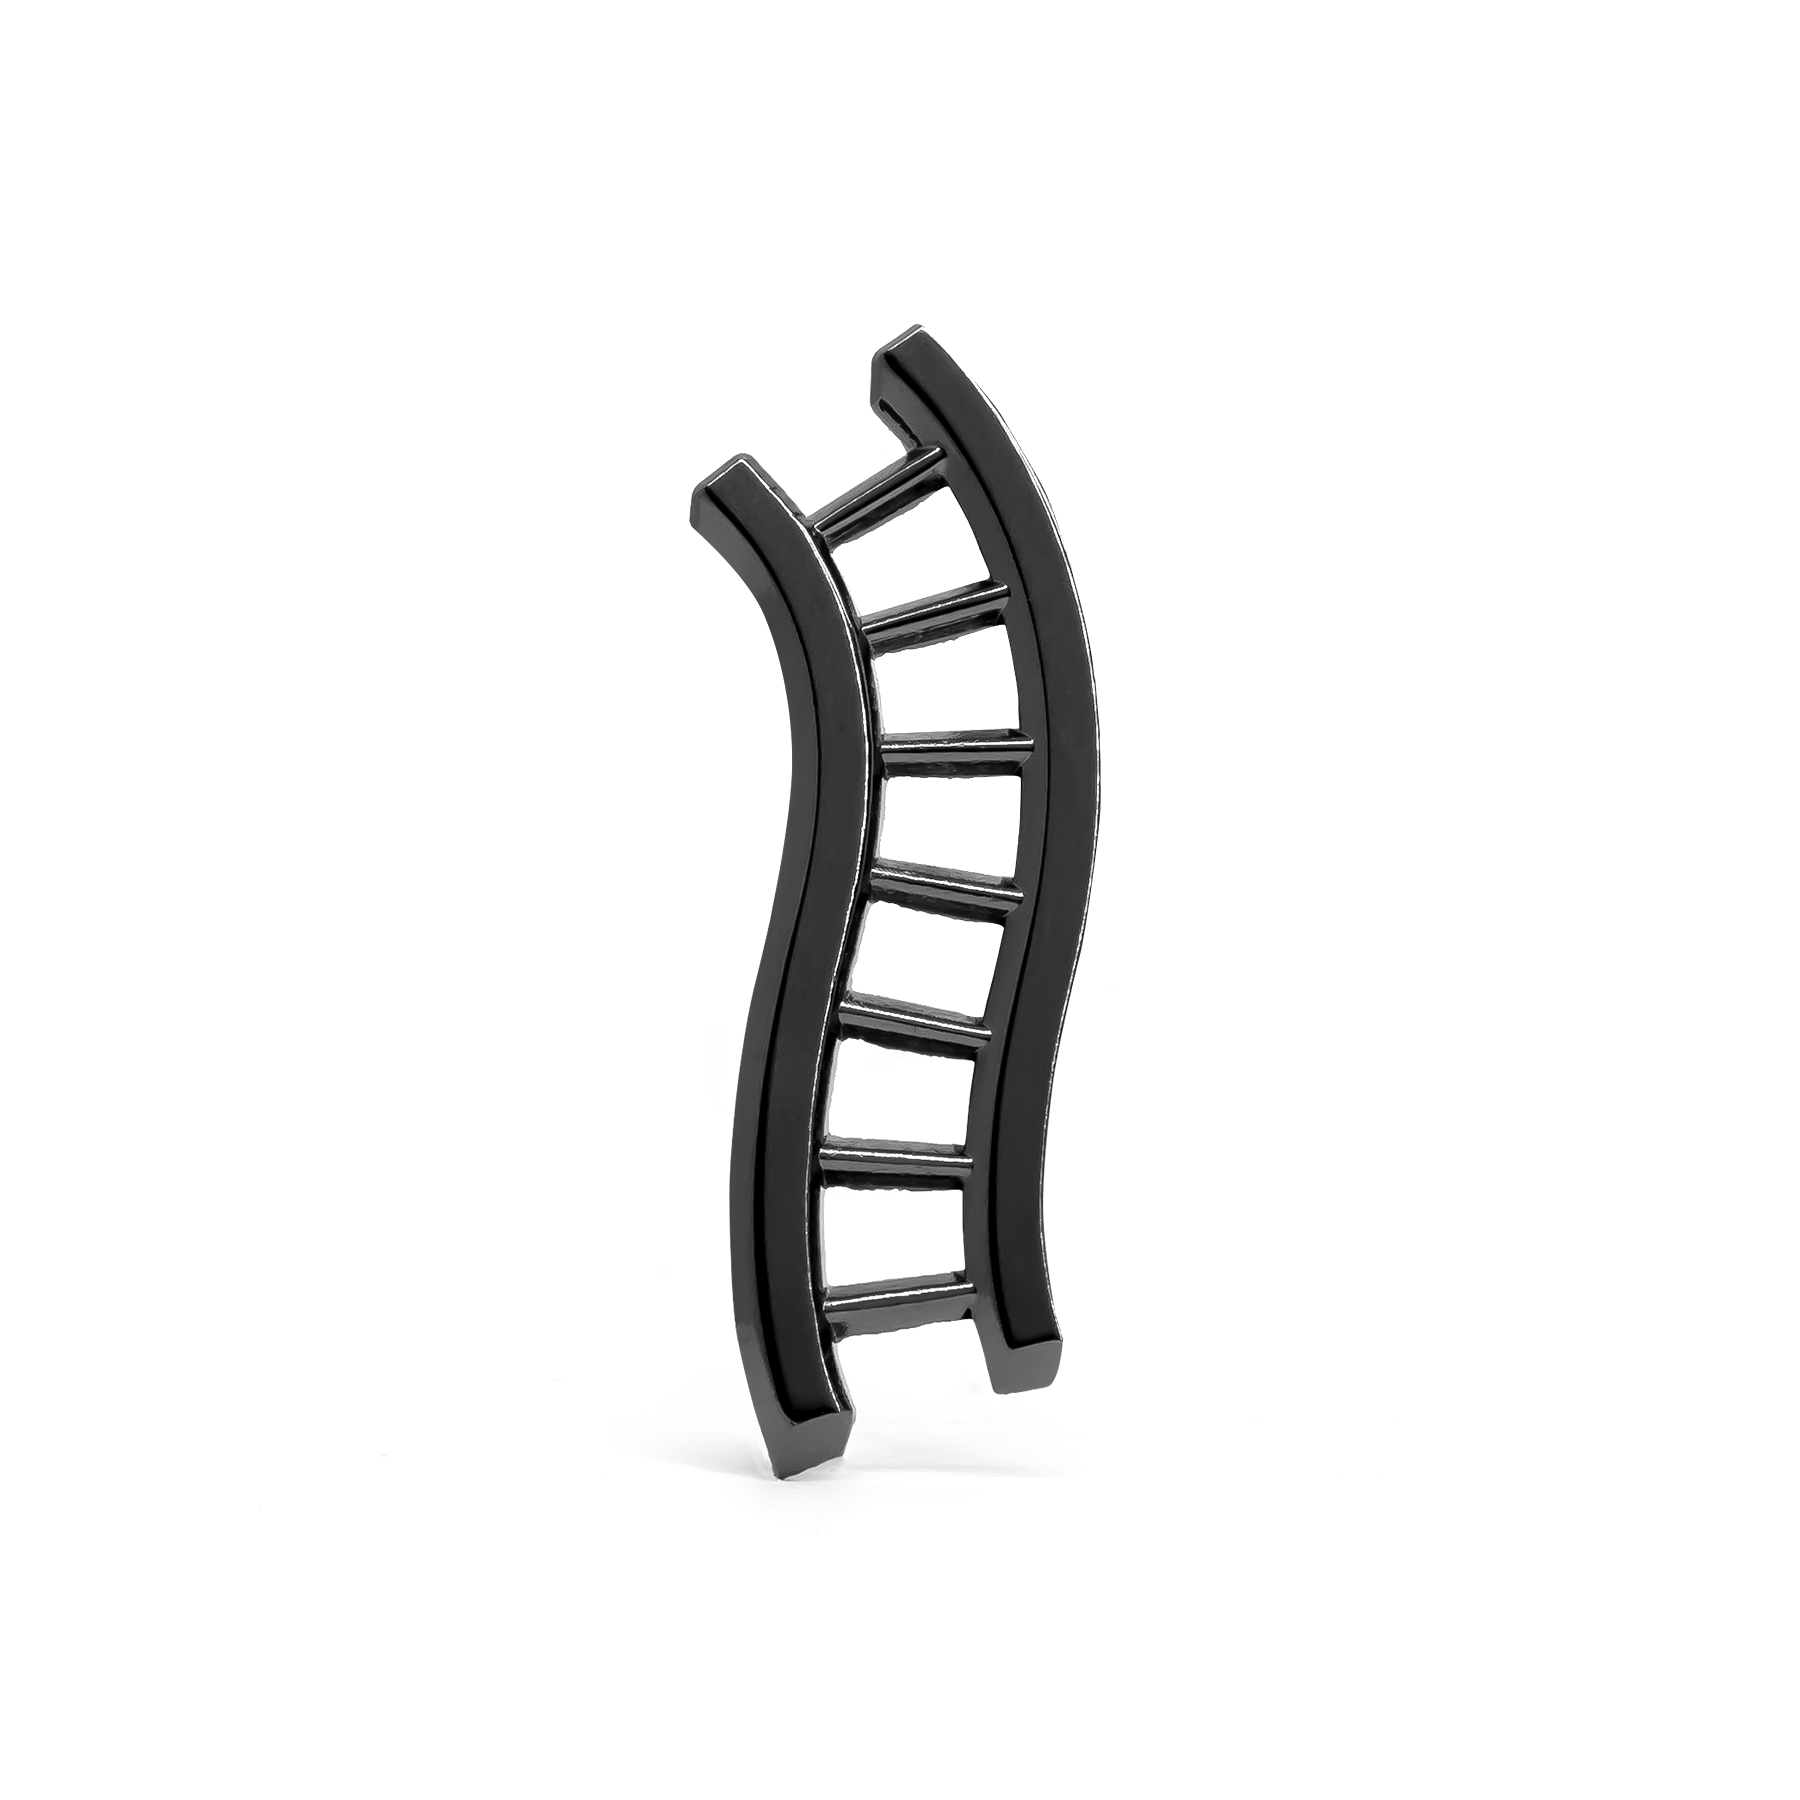 Ladder molded pin